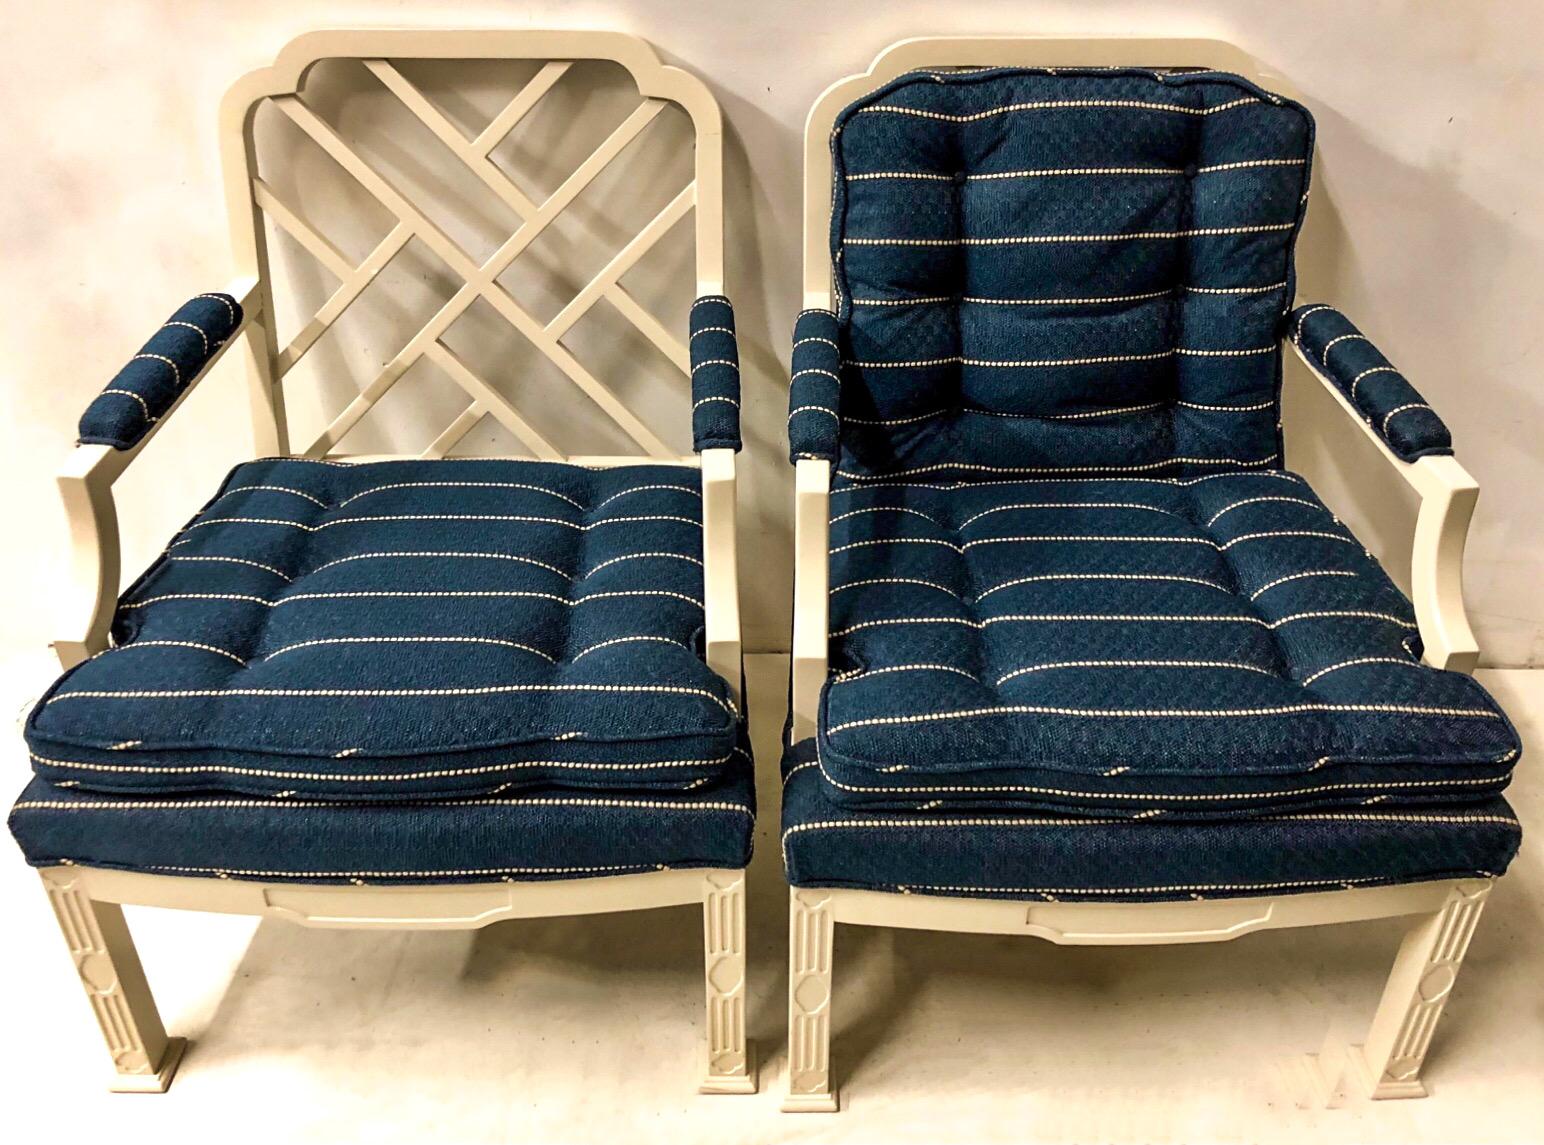 Late 20th Century 1970s Chinese Chippendale Style Chairs by Erwin Lambeth -A Pair For Sale